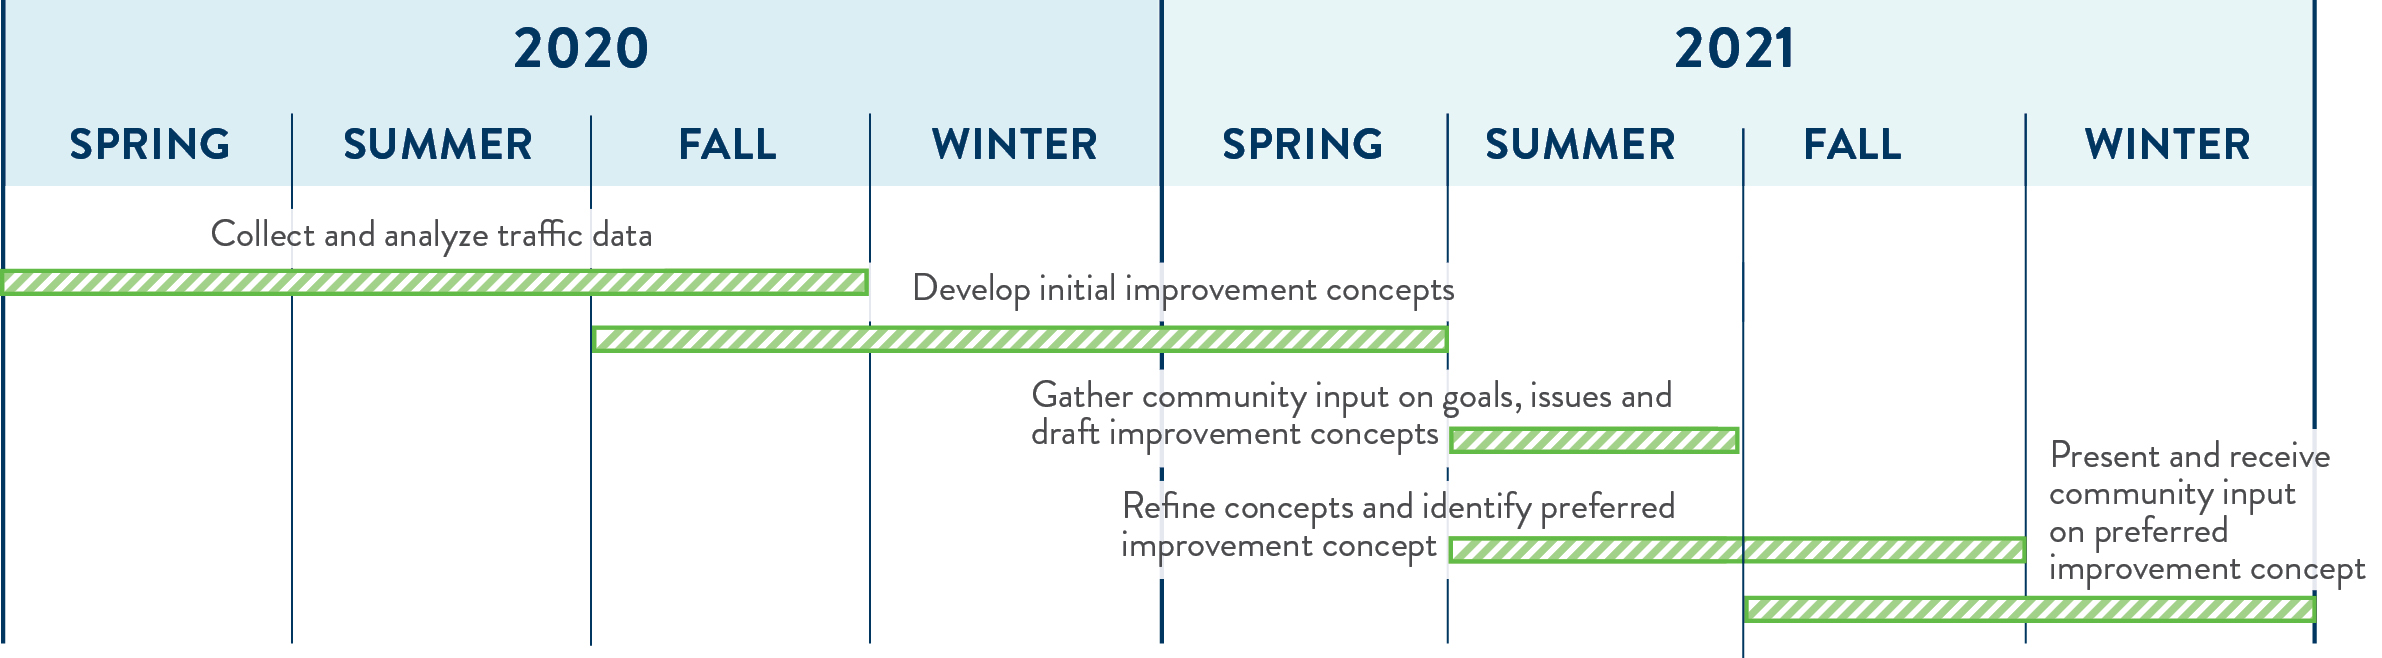 Fall 2019 -Spring 2020: Collect and analyze data; Summer 2020 - Spring 2021: Develop and refine roadway concepts; Fall 2020 - Spring 2021: Gather community input; Spring 2021: Identify preferred oncept; Summer 2021: Share preferred concept.